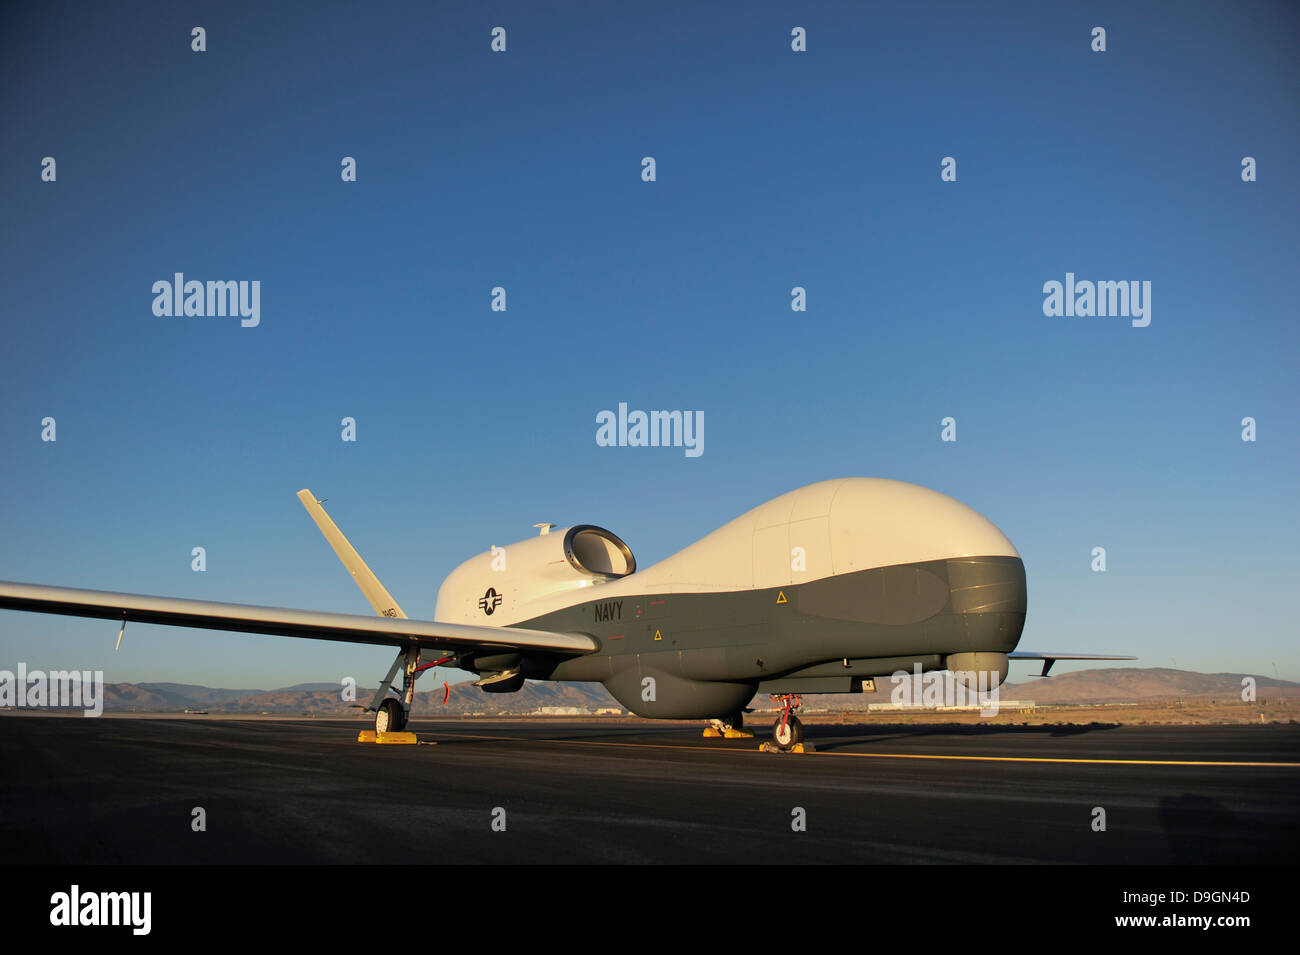 June 11, 2012 - An RQ-4 Global Hawk unmanned aerial vehicle sits on the flight line. Stock Photo